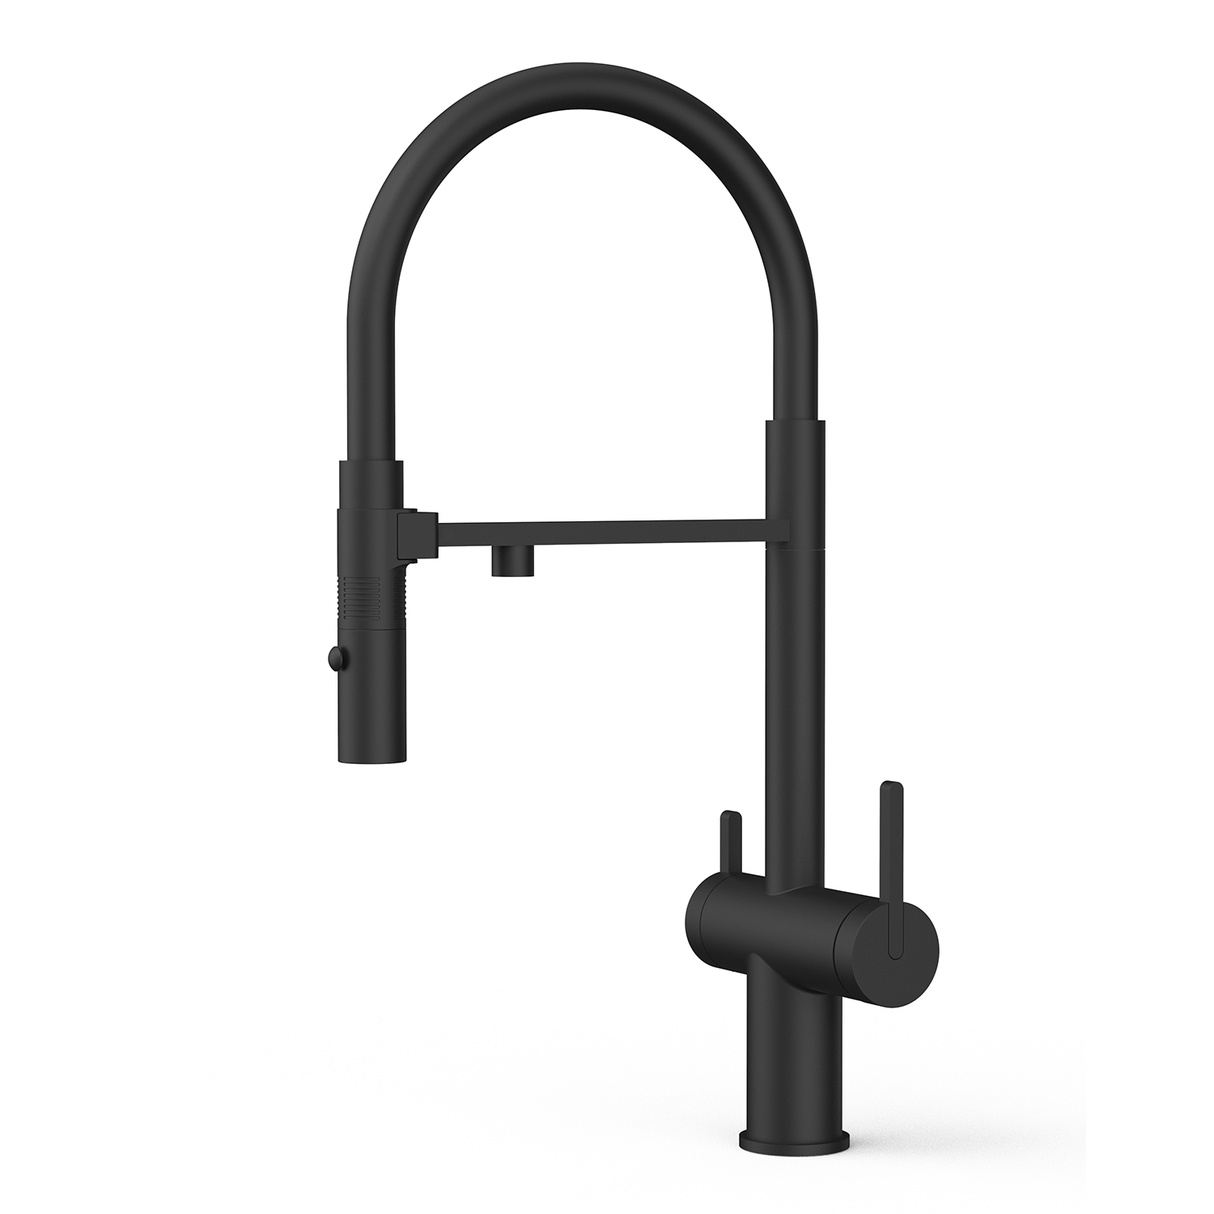 DAX Brass Dual Function Pull Out and Filter Water Spout, Matte Black DAX-8020094-BL